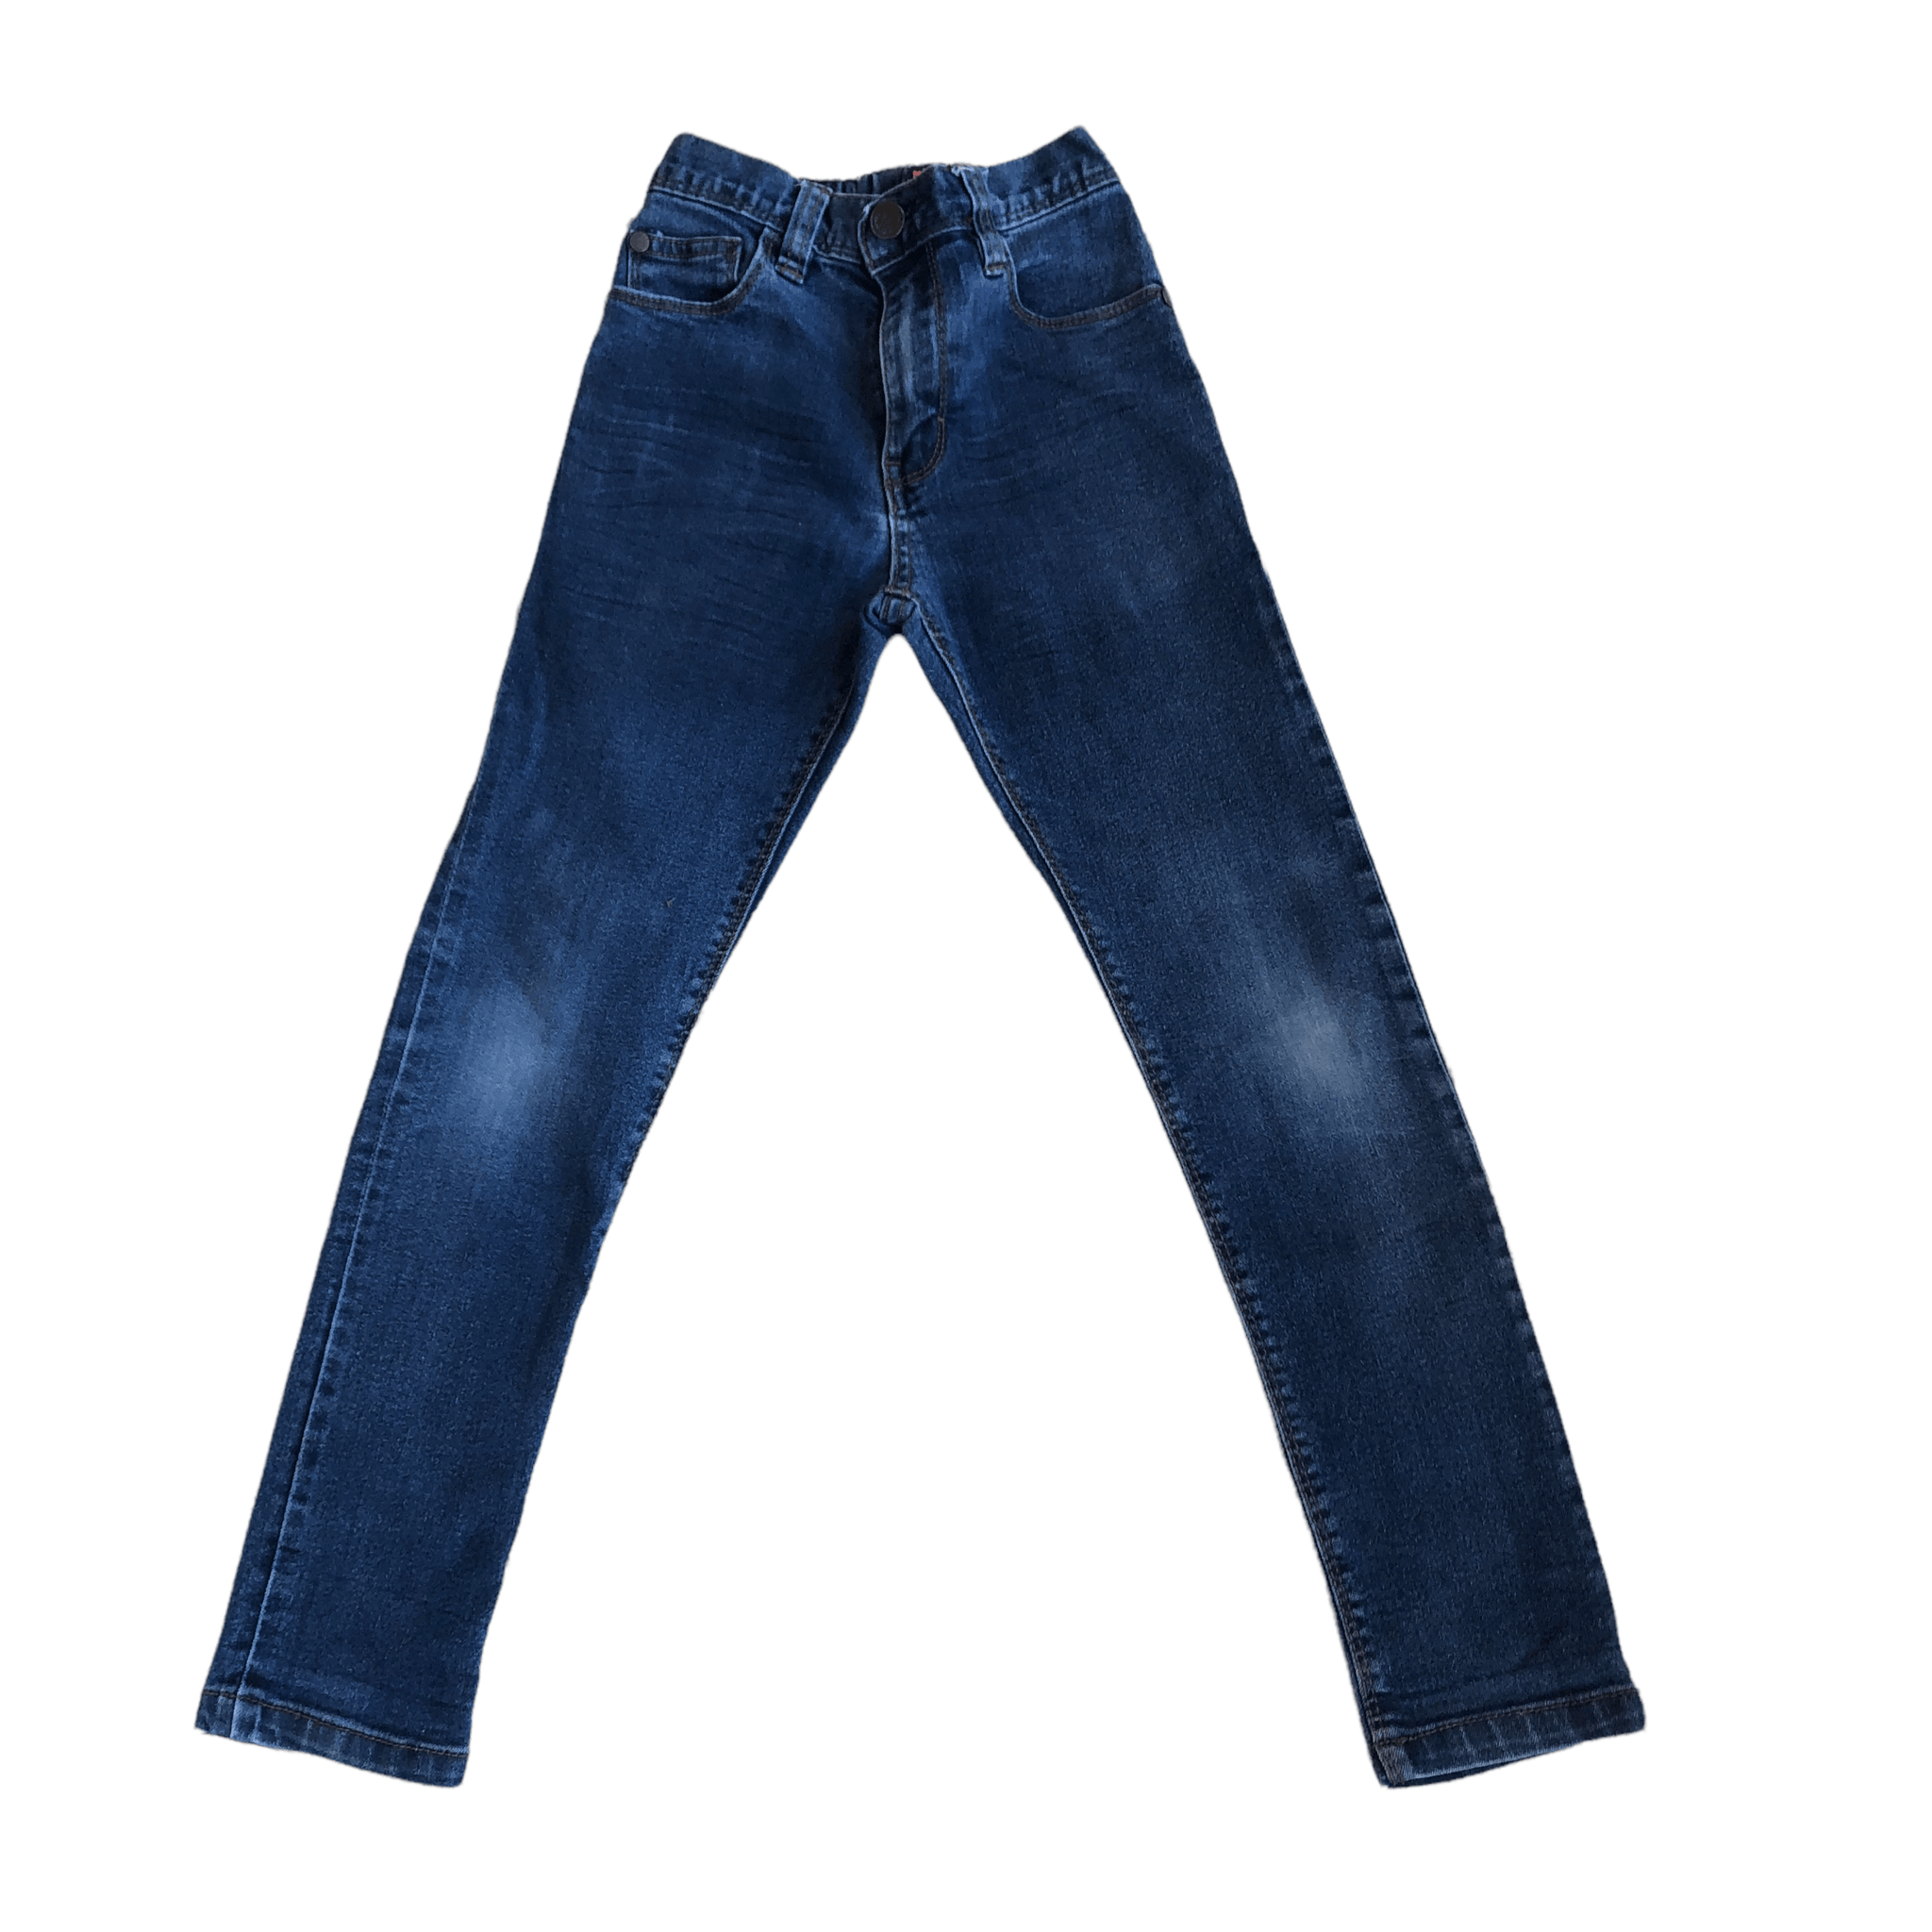 Pre-Owned NEXT Denim Skinny Jeans (Age 7) The Re-Generation